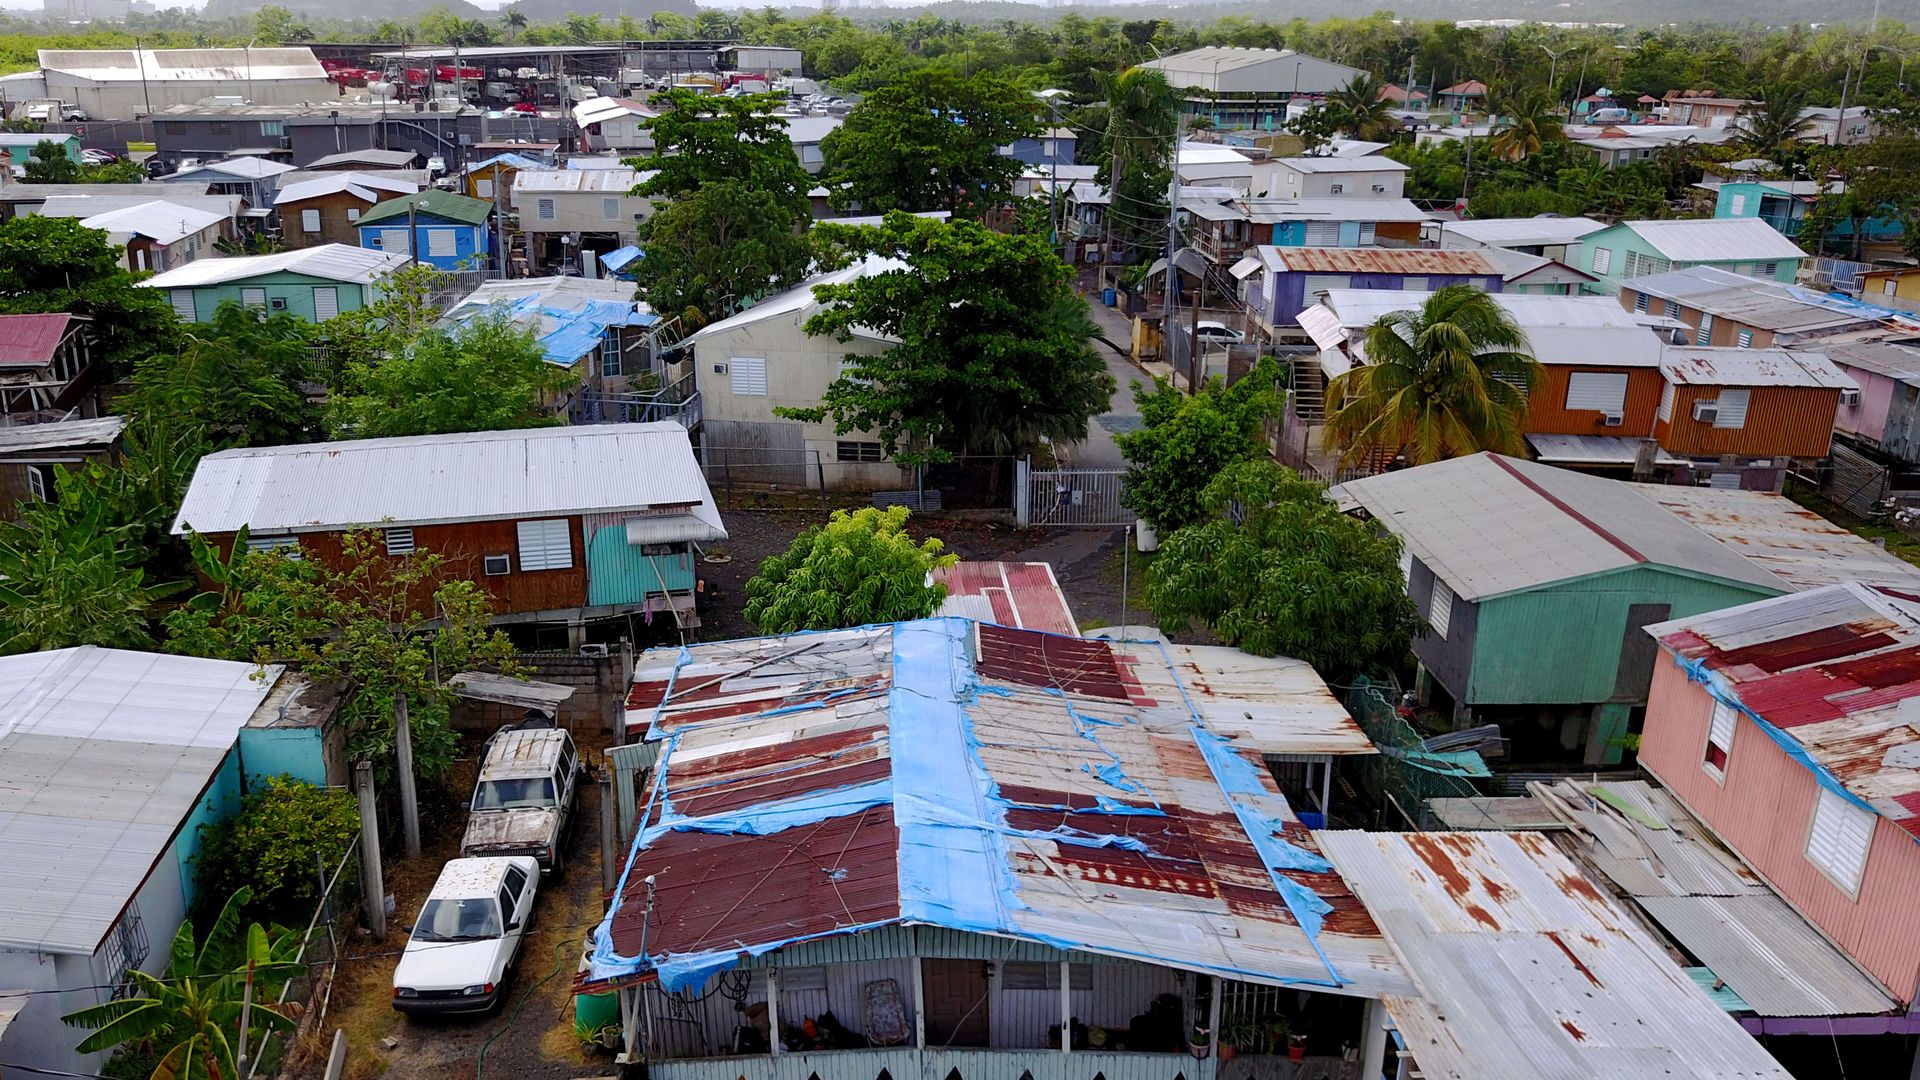 The blue tarp that was used to protect the roof damaged by Hurricane Maria two years ago is showing wear and tear in San Juan, Puerto Rico, September 18